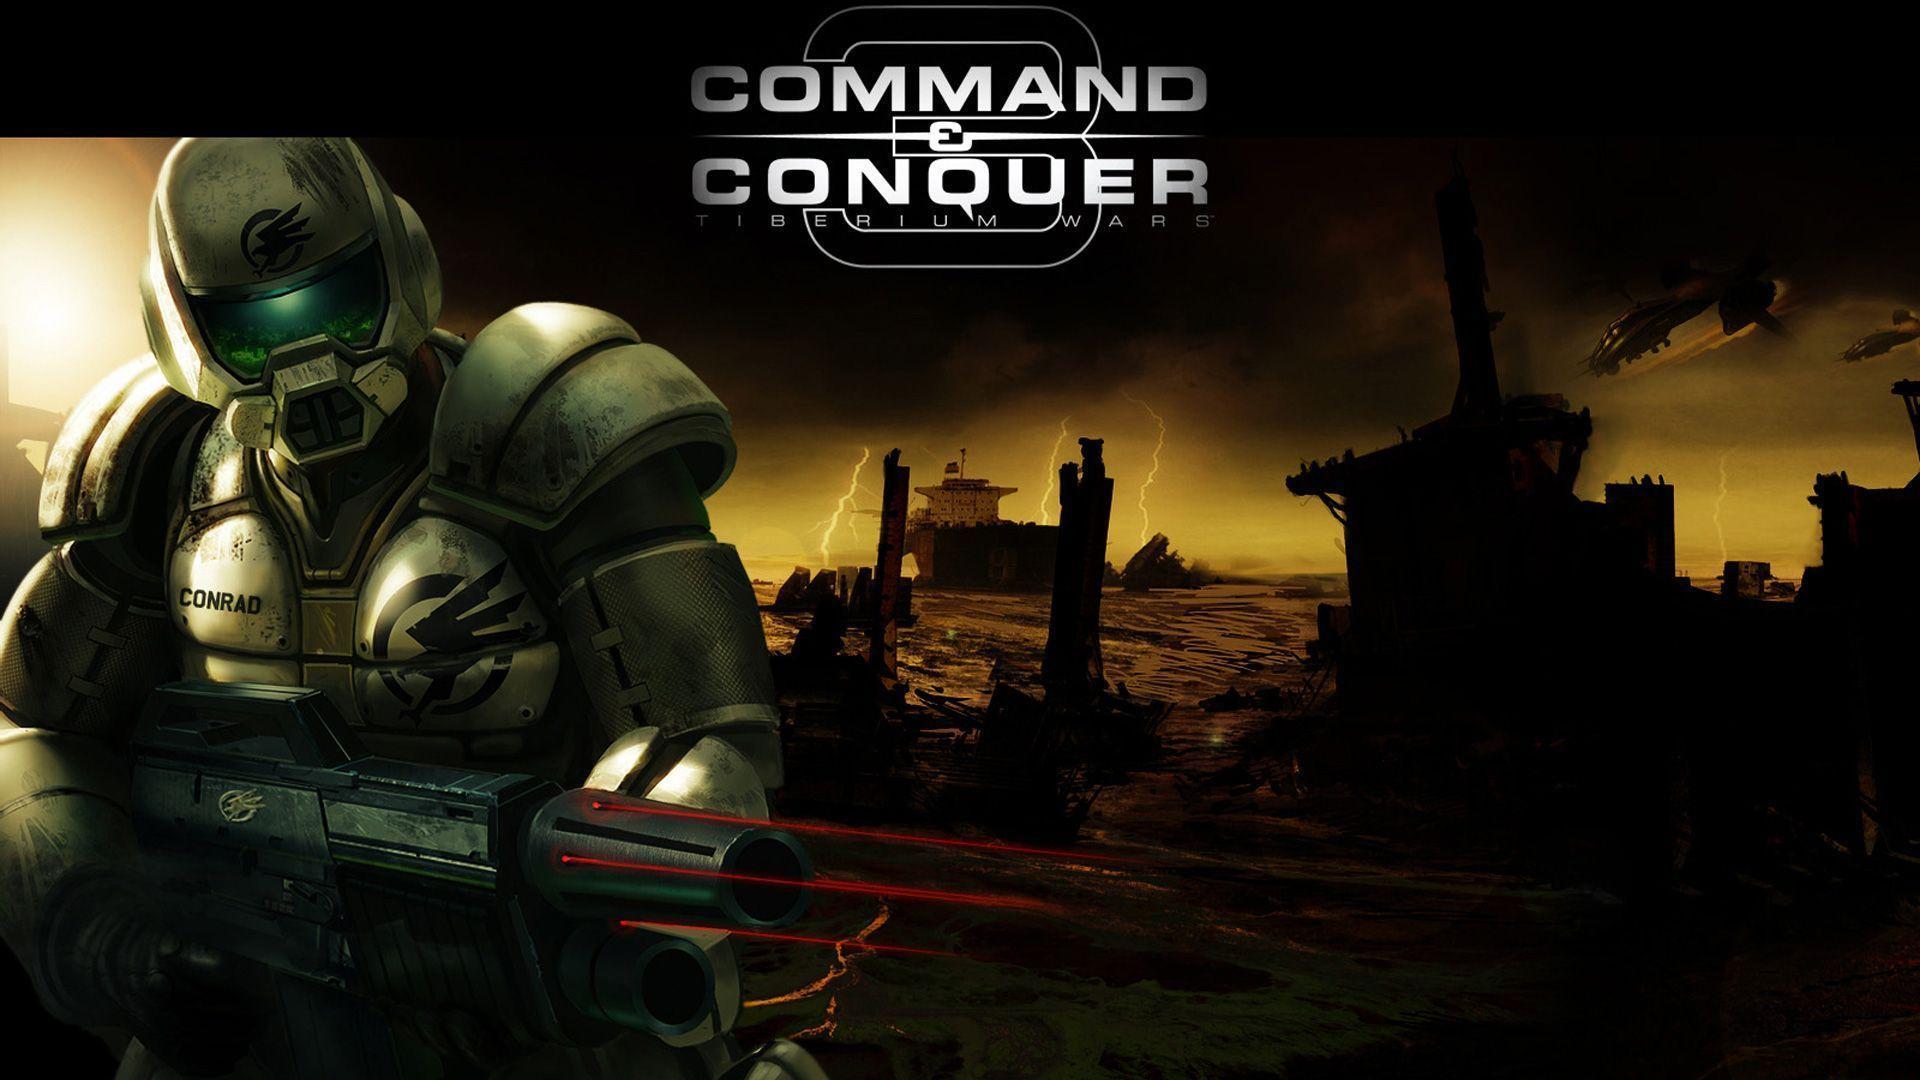 Command Conquer wallpapers